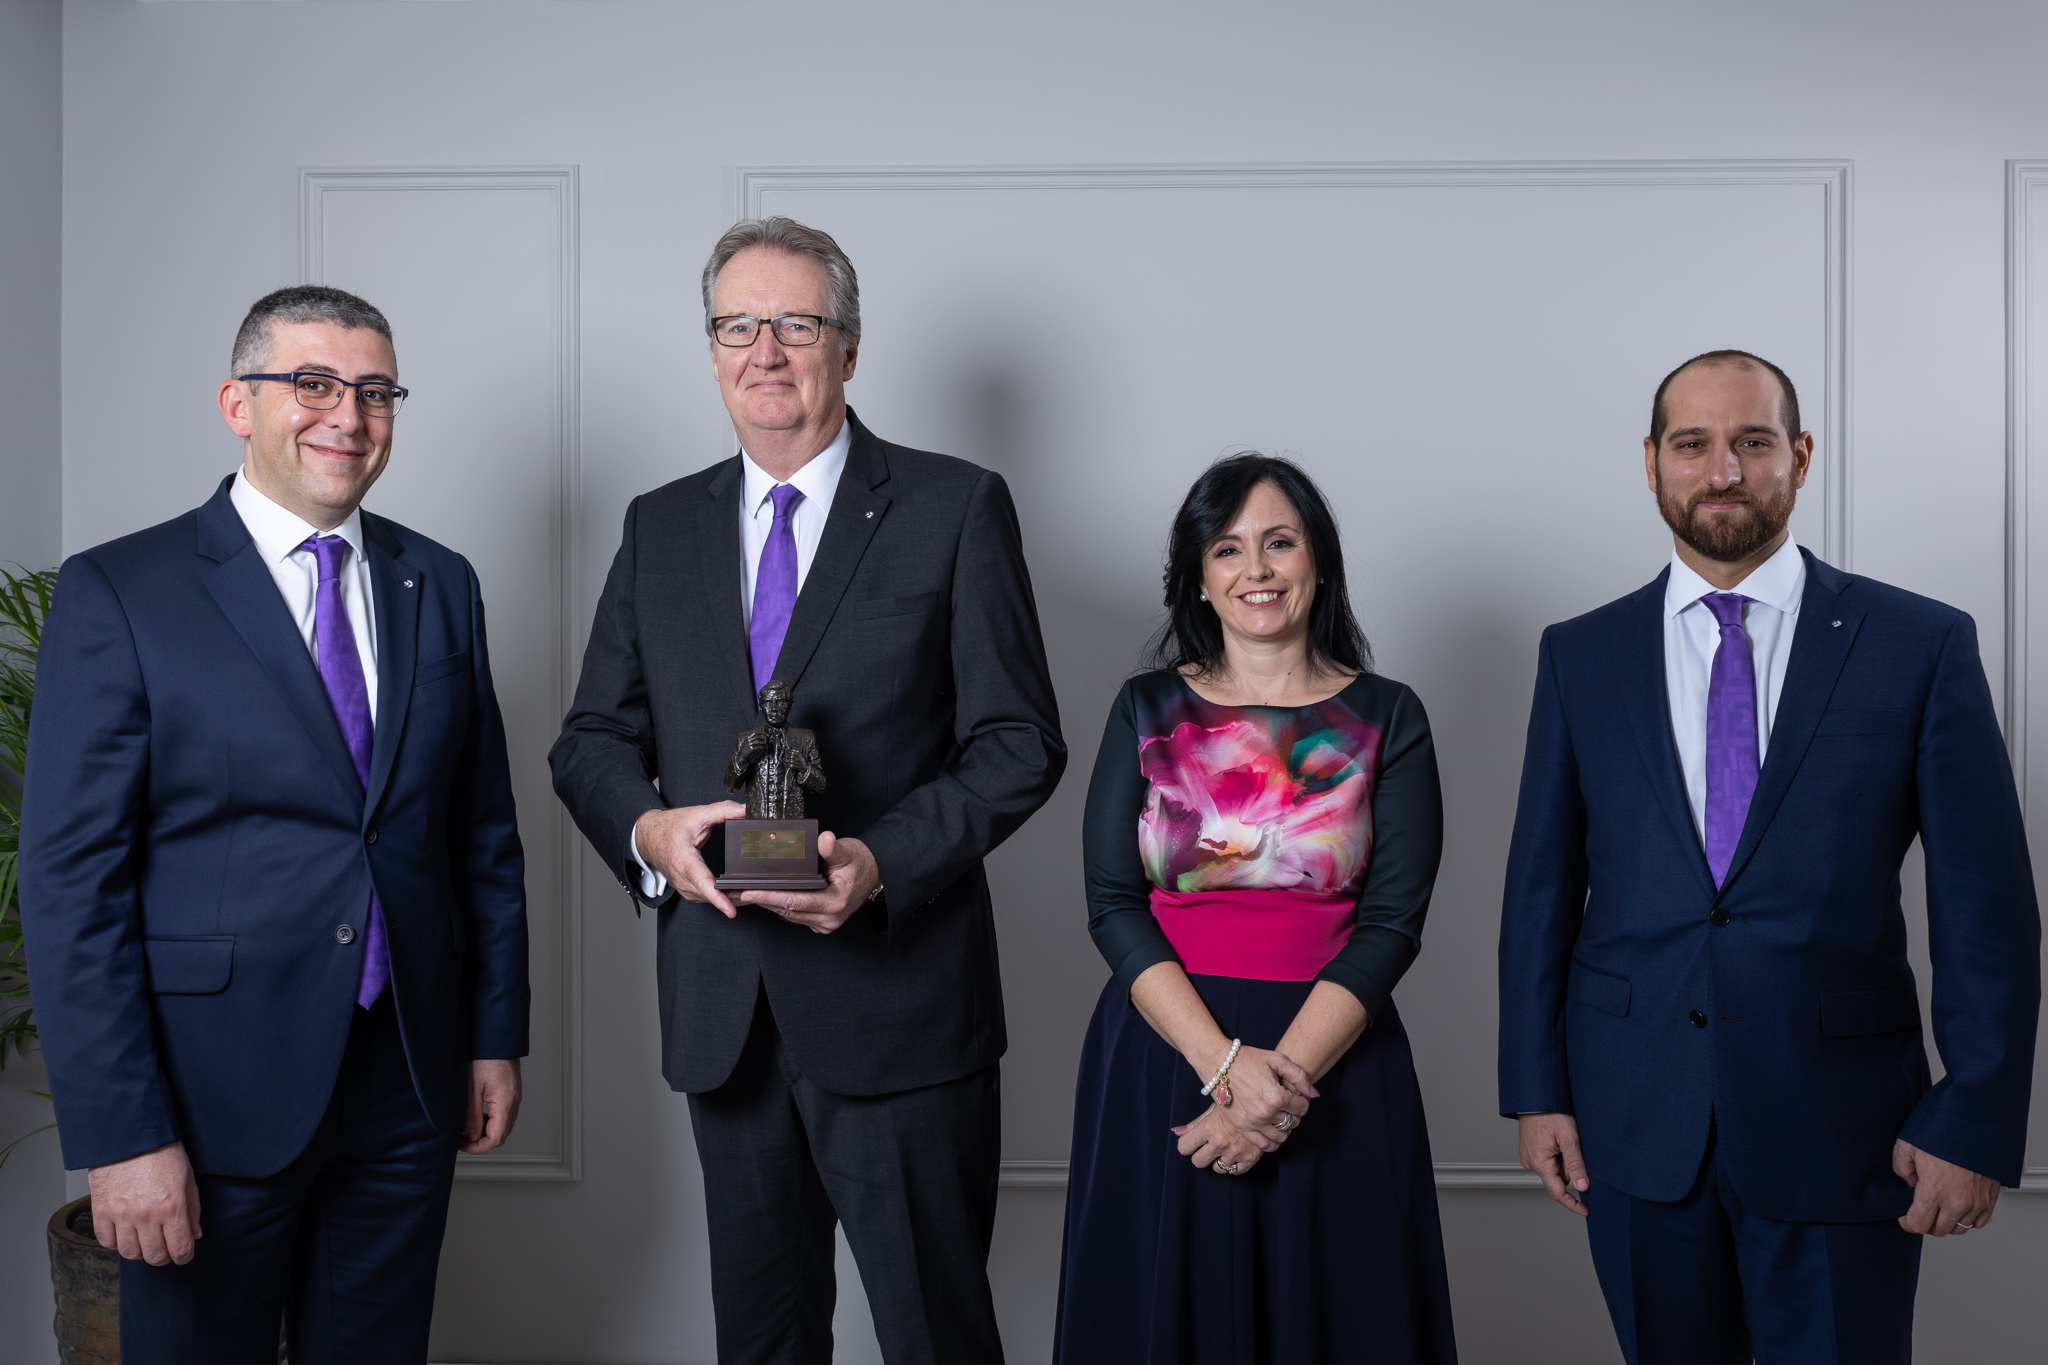 BNF Bank wins again The Banker, ‘Bank of the Year 2021’ Award for 2nd